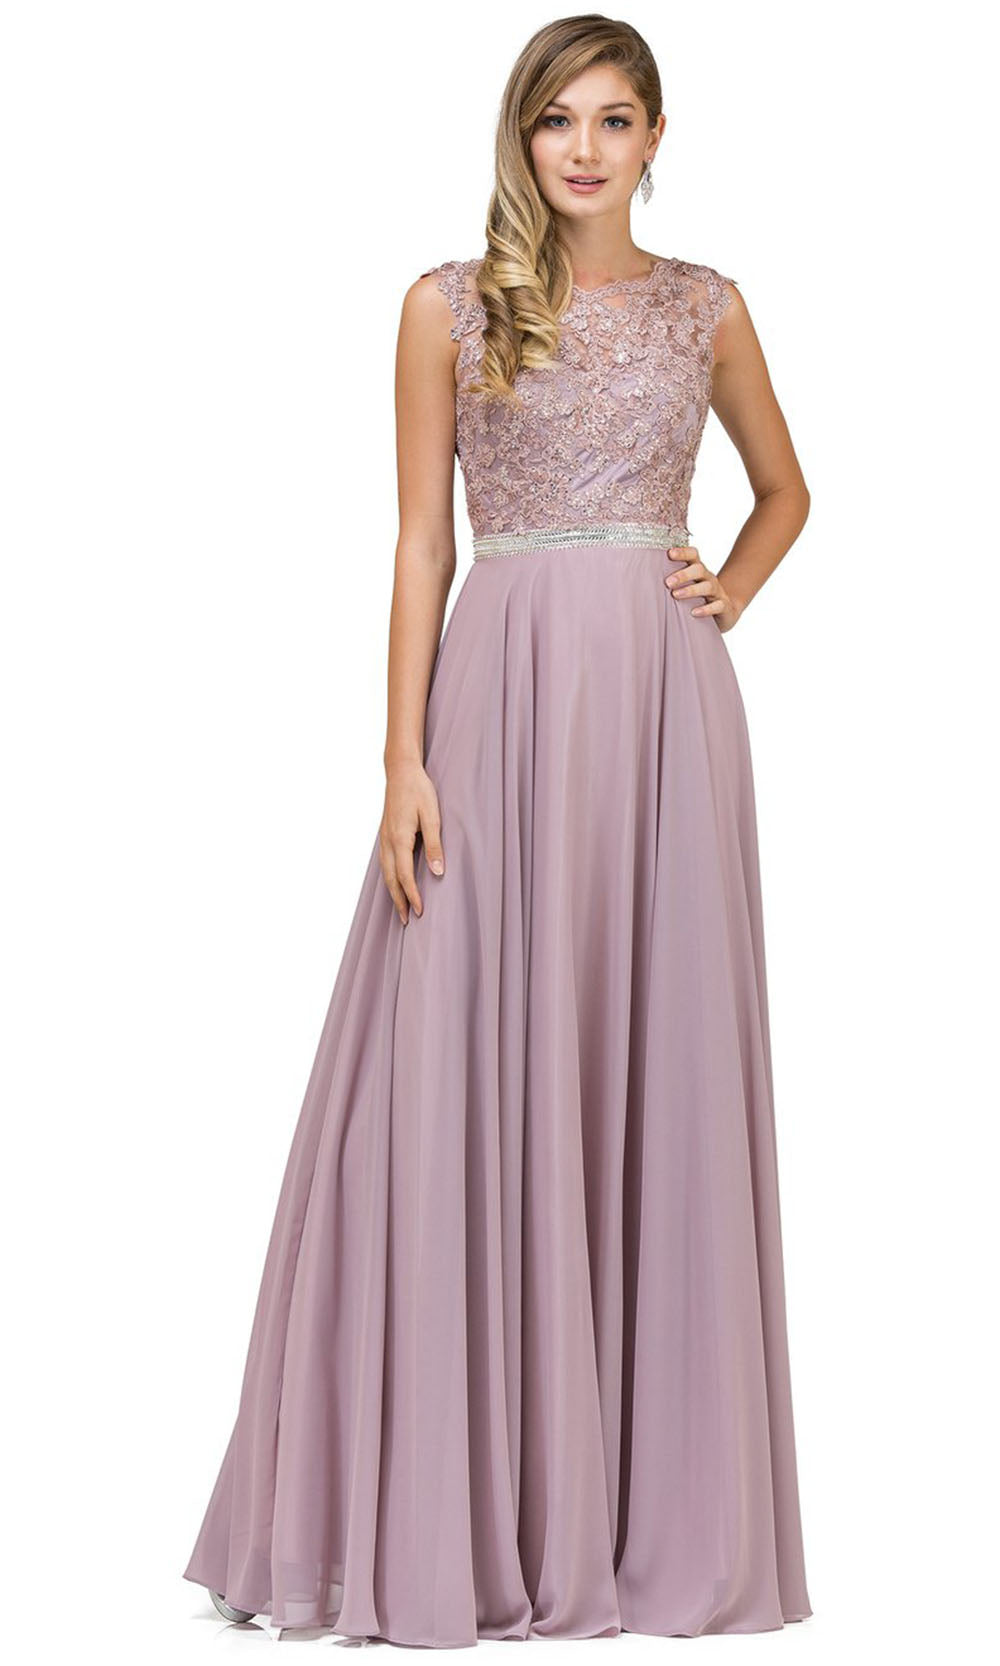 Dancing Queen - 9675 Embroidered Bateau Neck A-Line Gown In Brown